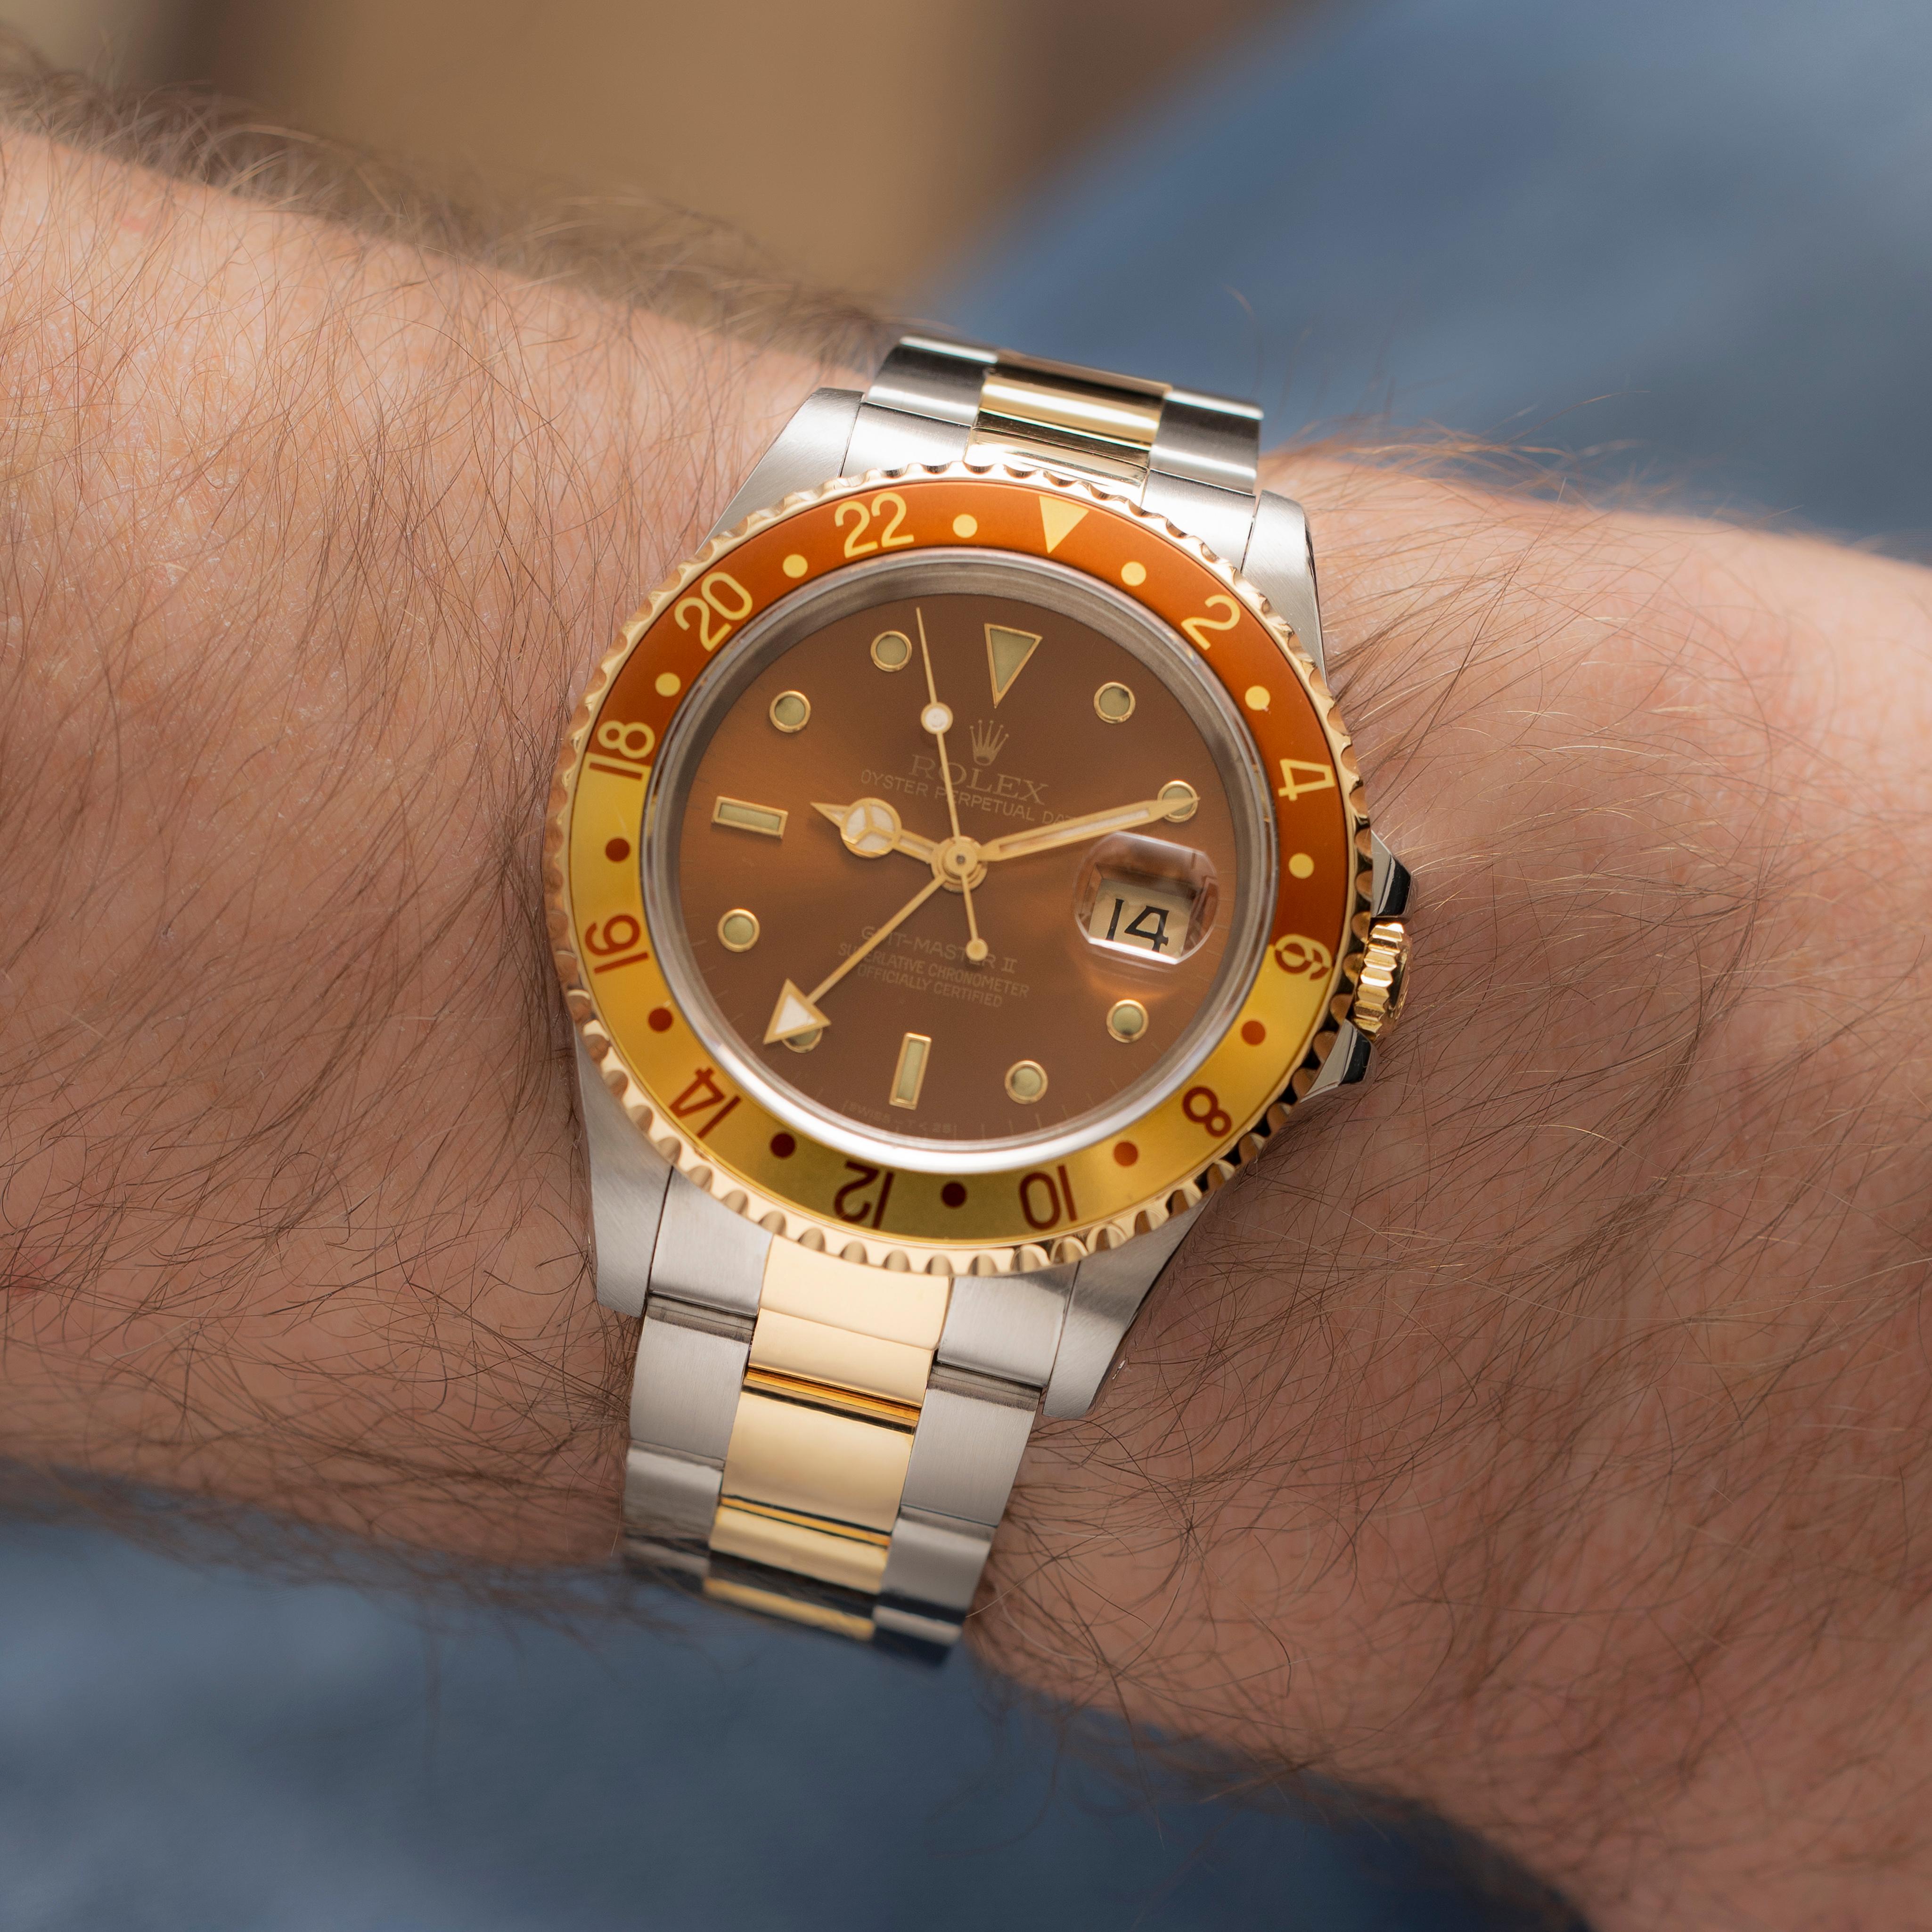 Modern 1988 Rolex GMT II Stainless Steel and 18k Gold, 